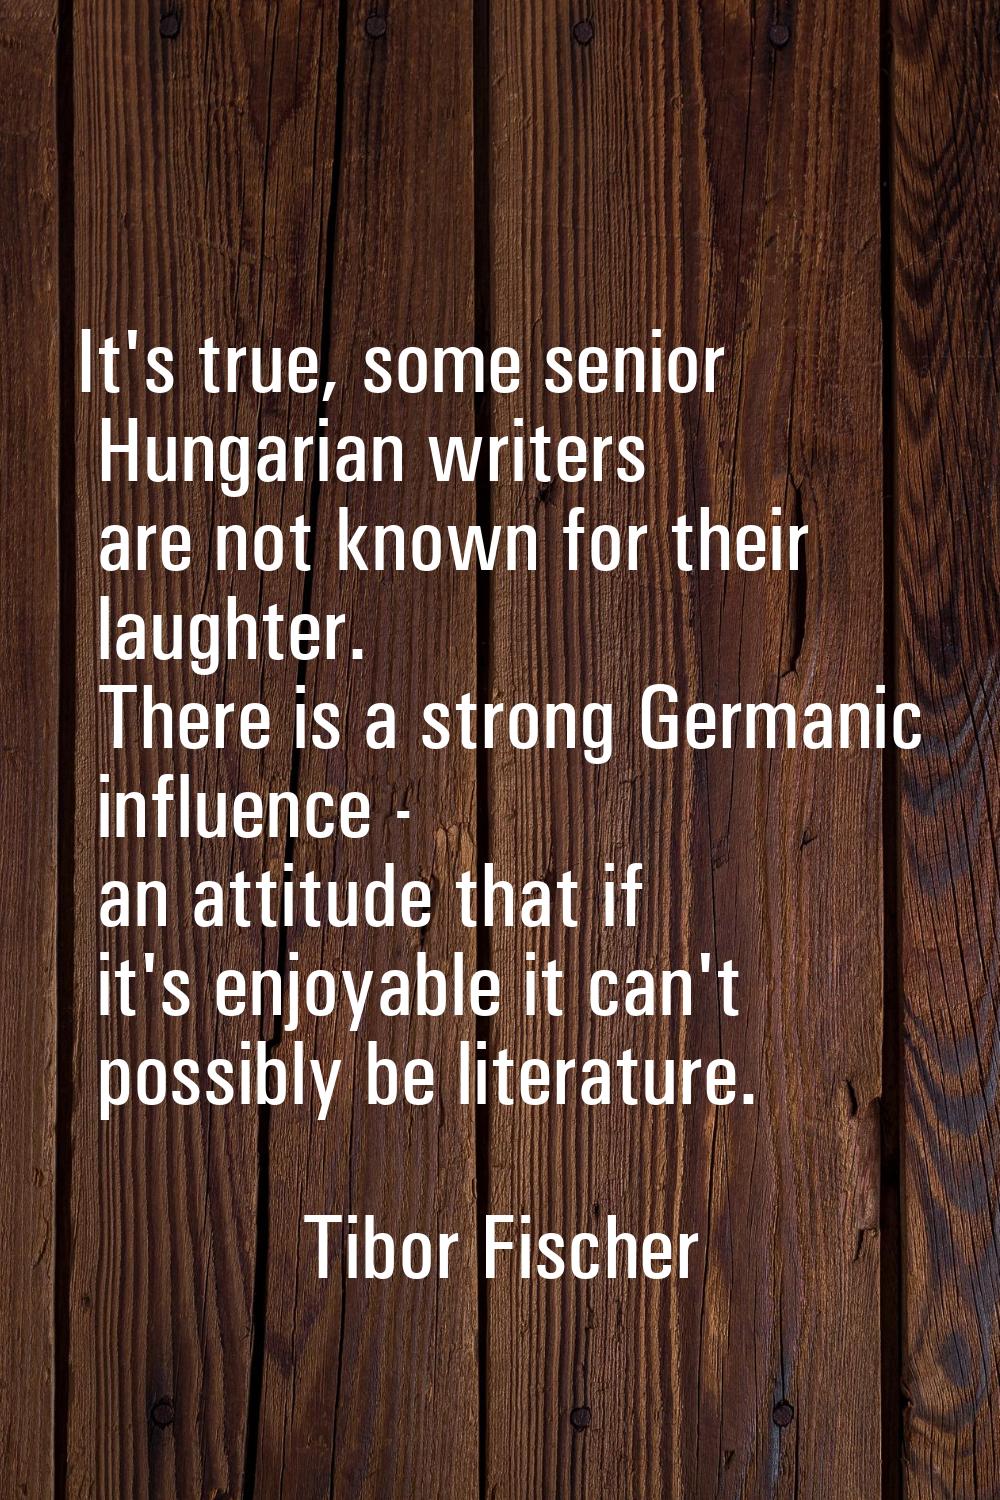 It's true, some senior Hungarian writers are not known for their laughter. There is a strong German